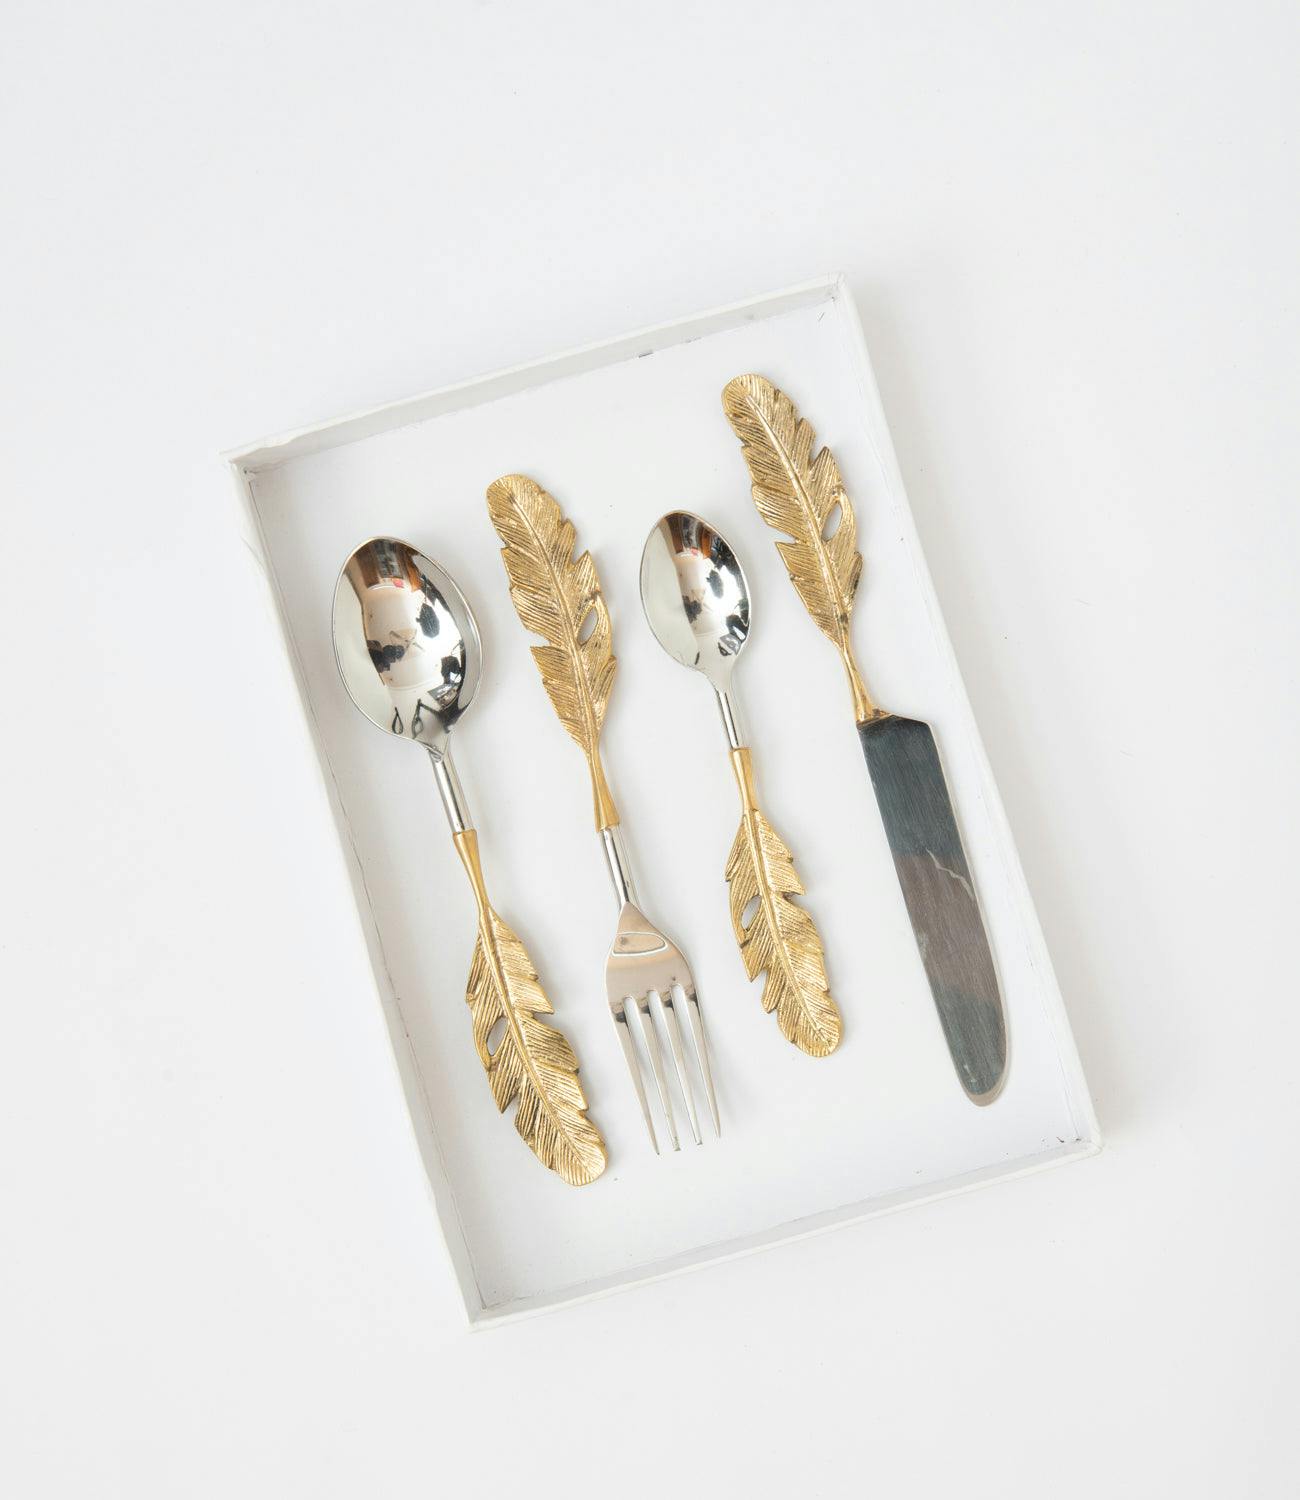 Gold Leaf Cutlery Set - Set of 4, a product by Table Manners